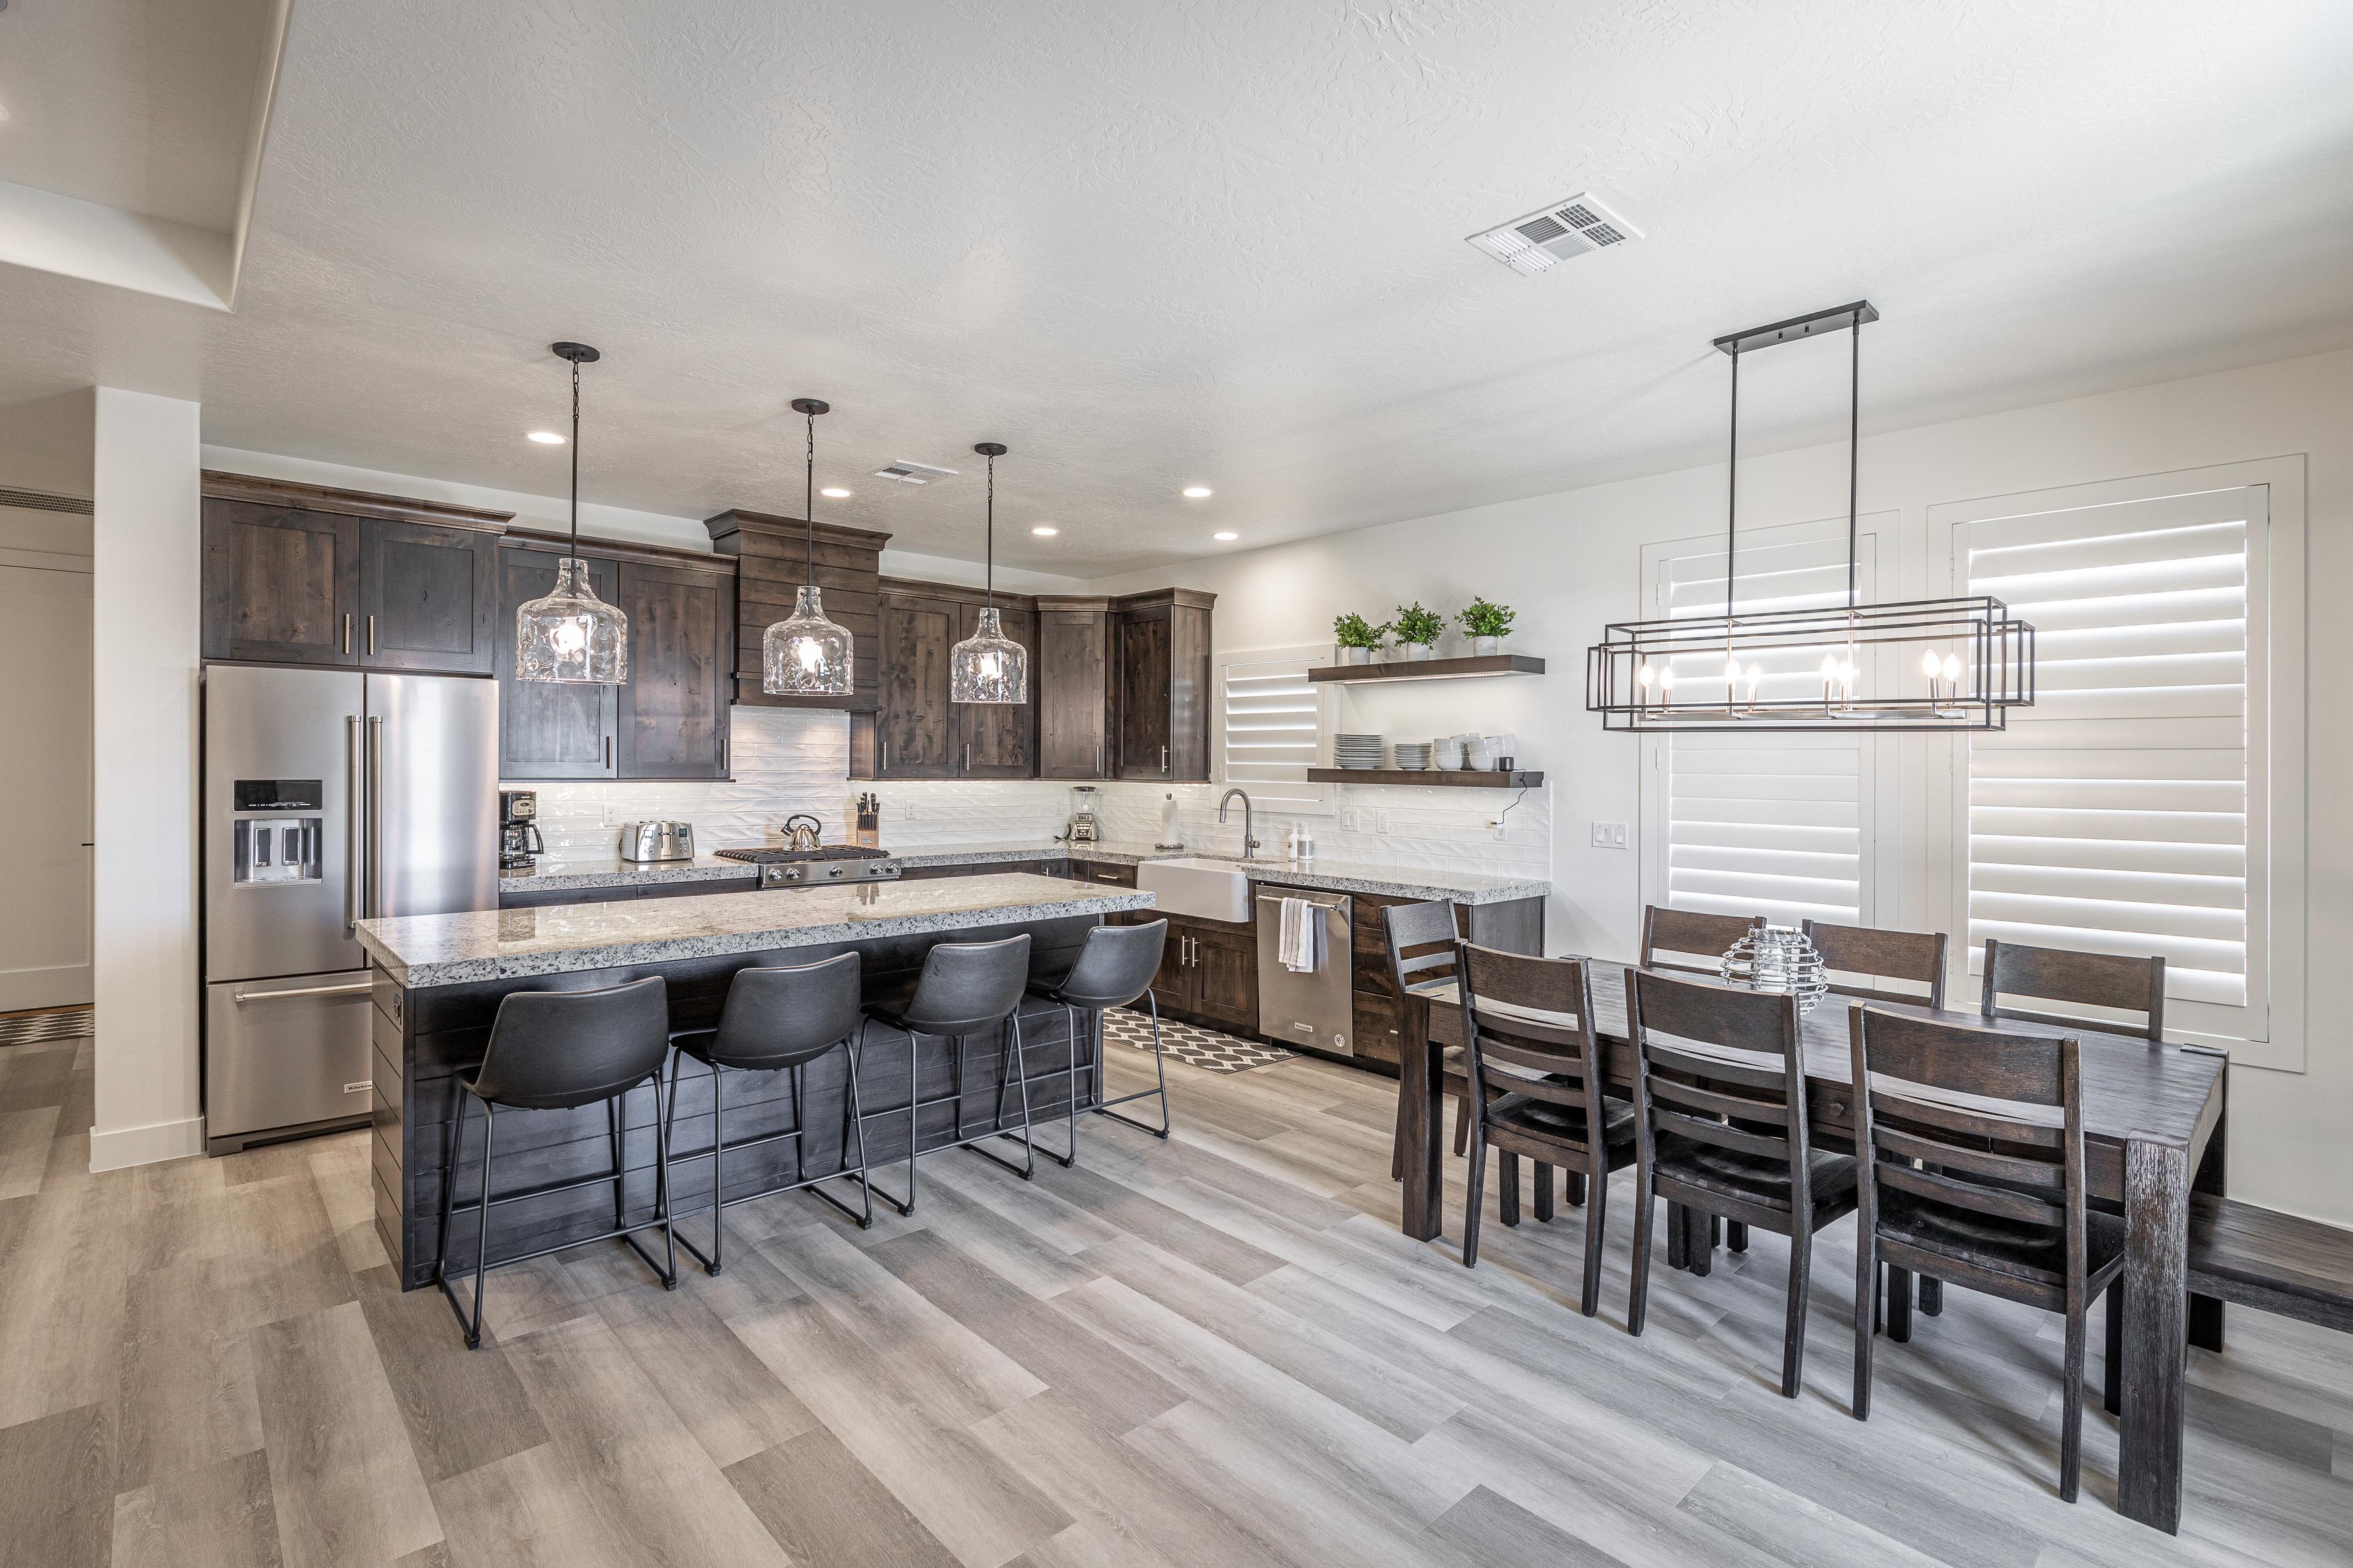 The kitchen is fully stocked with all the dishes, cookware, baking pans, and cutlery you will need for meal preparations and includes stainless steel appliances and granite counter tops. 